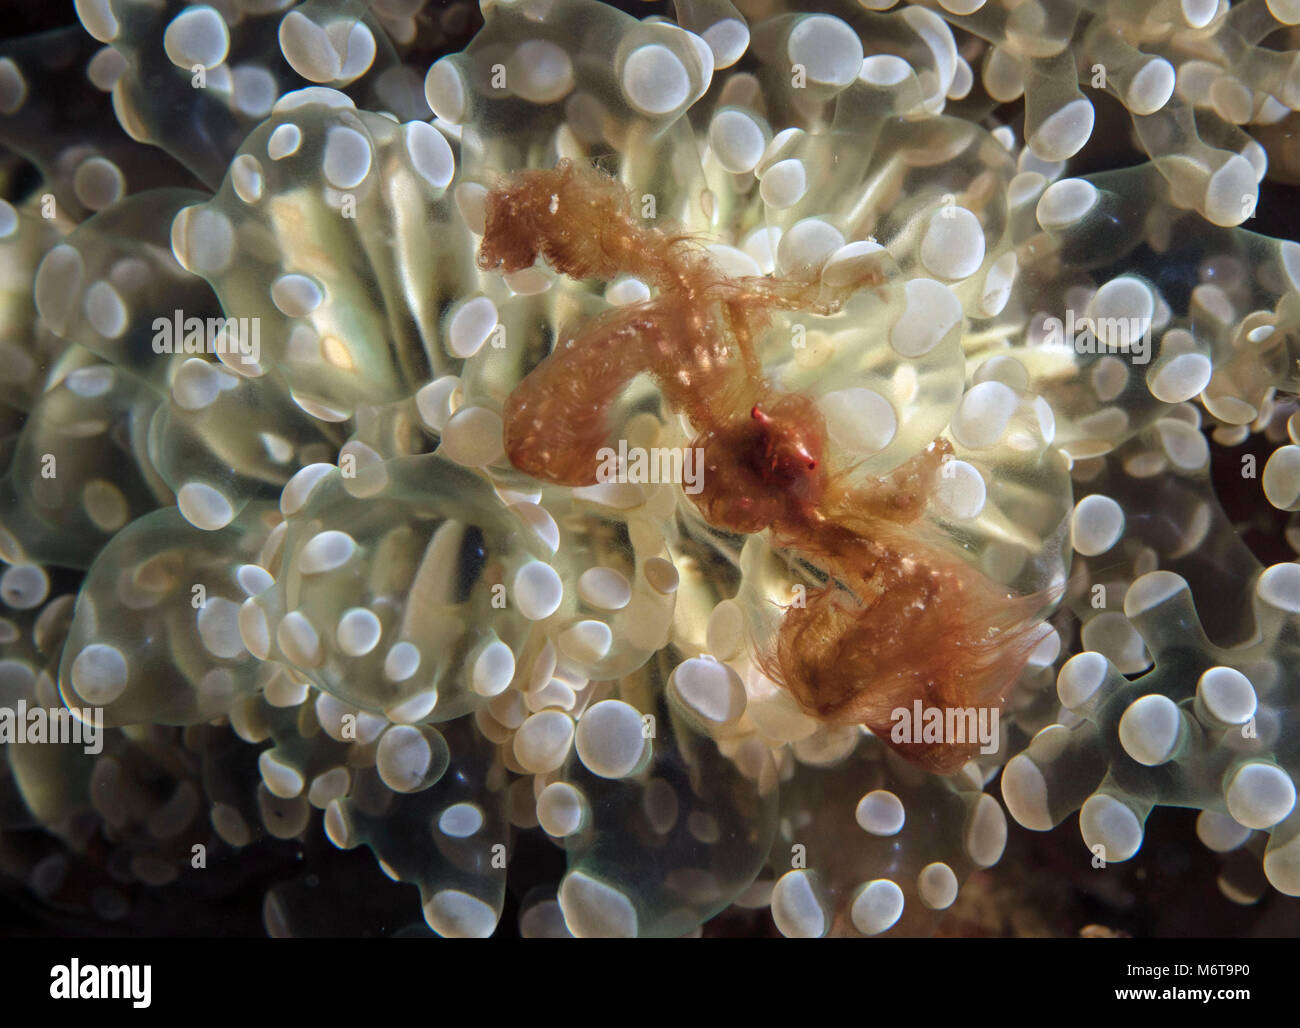 Orangutan crab (Oncinopus sp.). Picture was taken in the Celebes sea, Indonesia Stock Photo